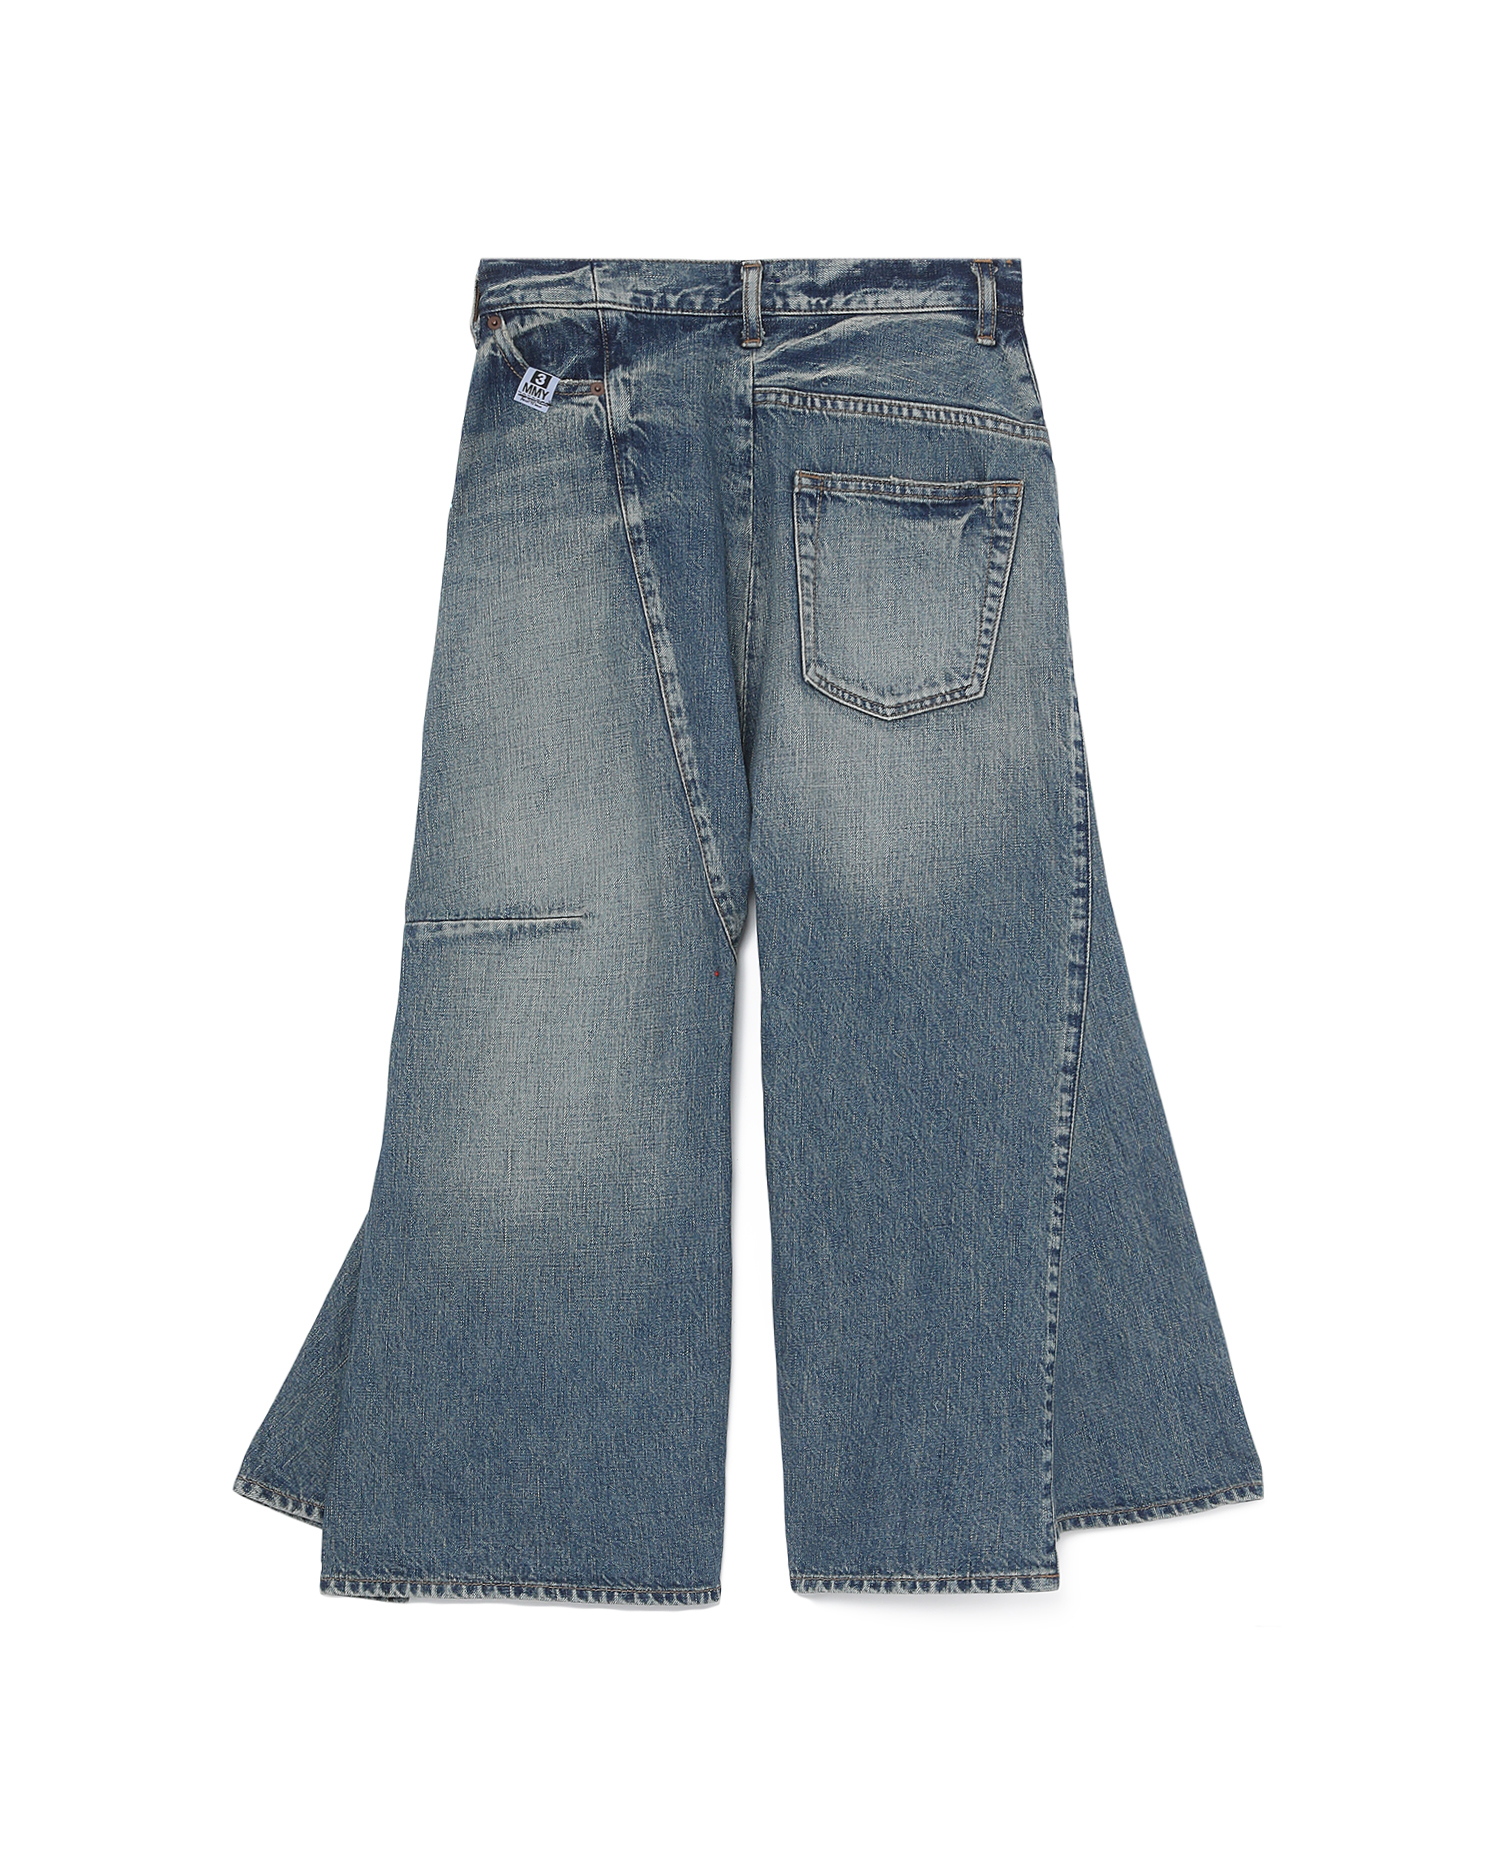 Deconstructed super flare jeans